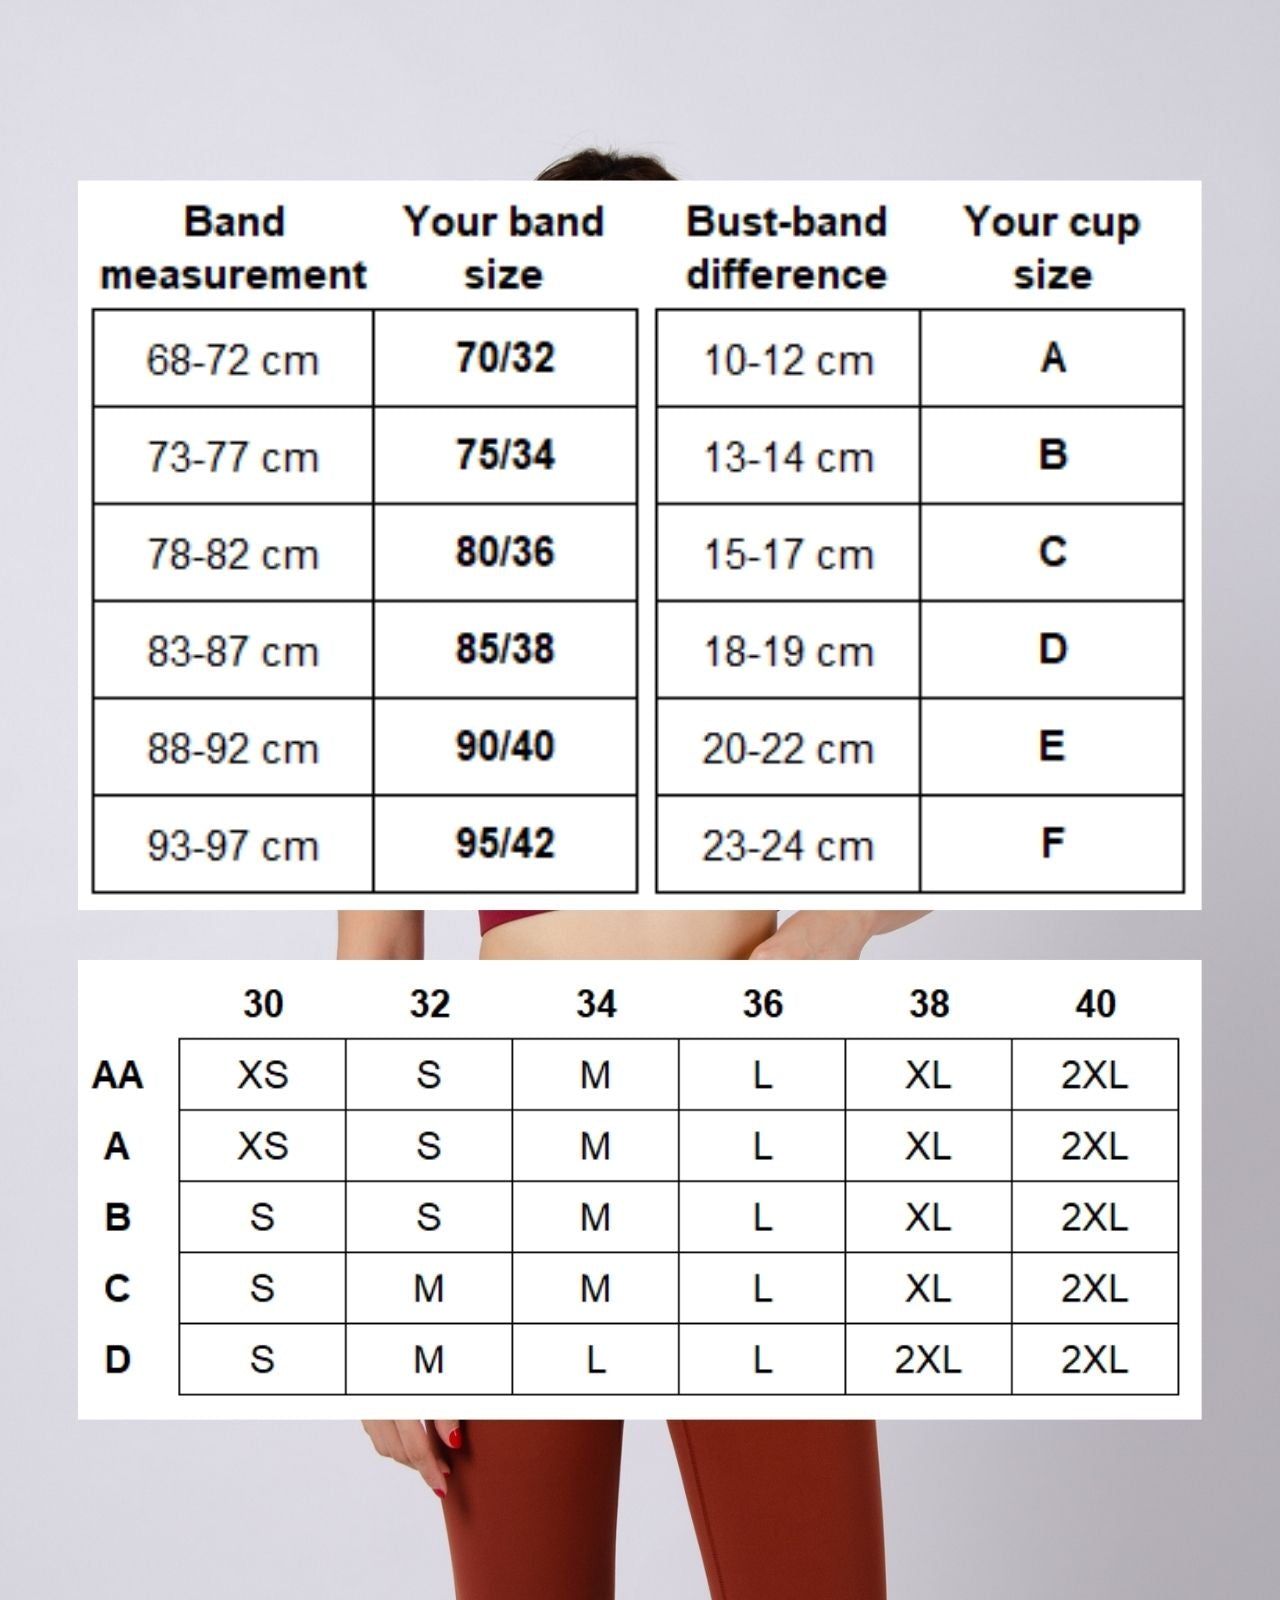 How to Measure Your Bra Size